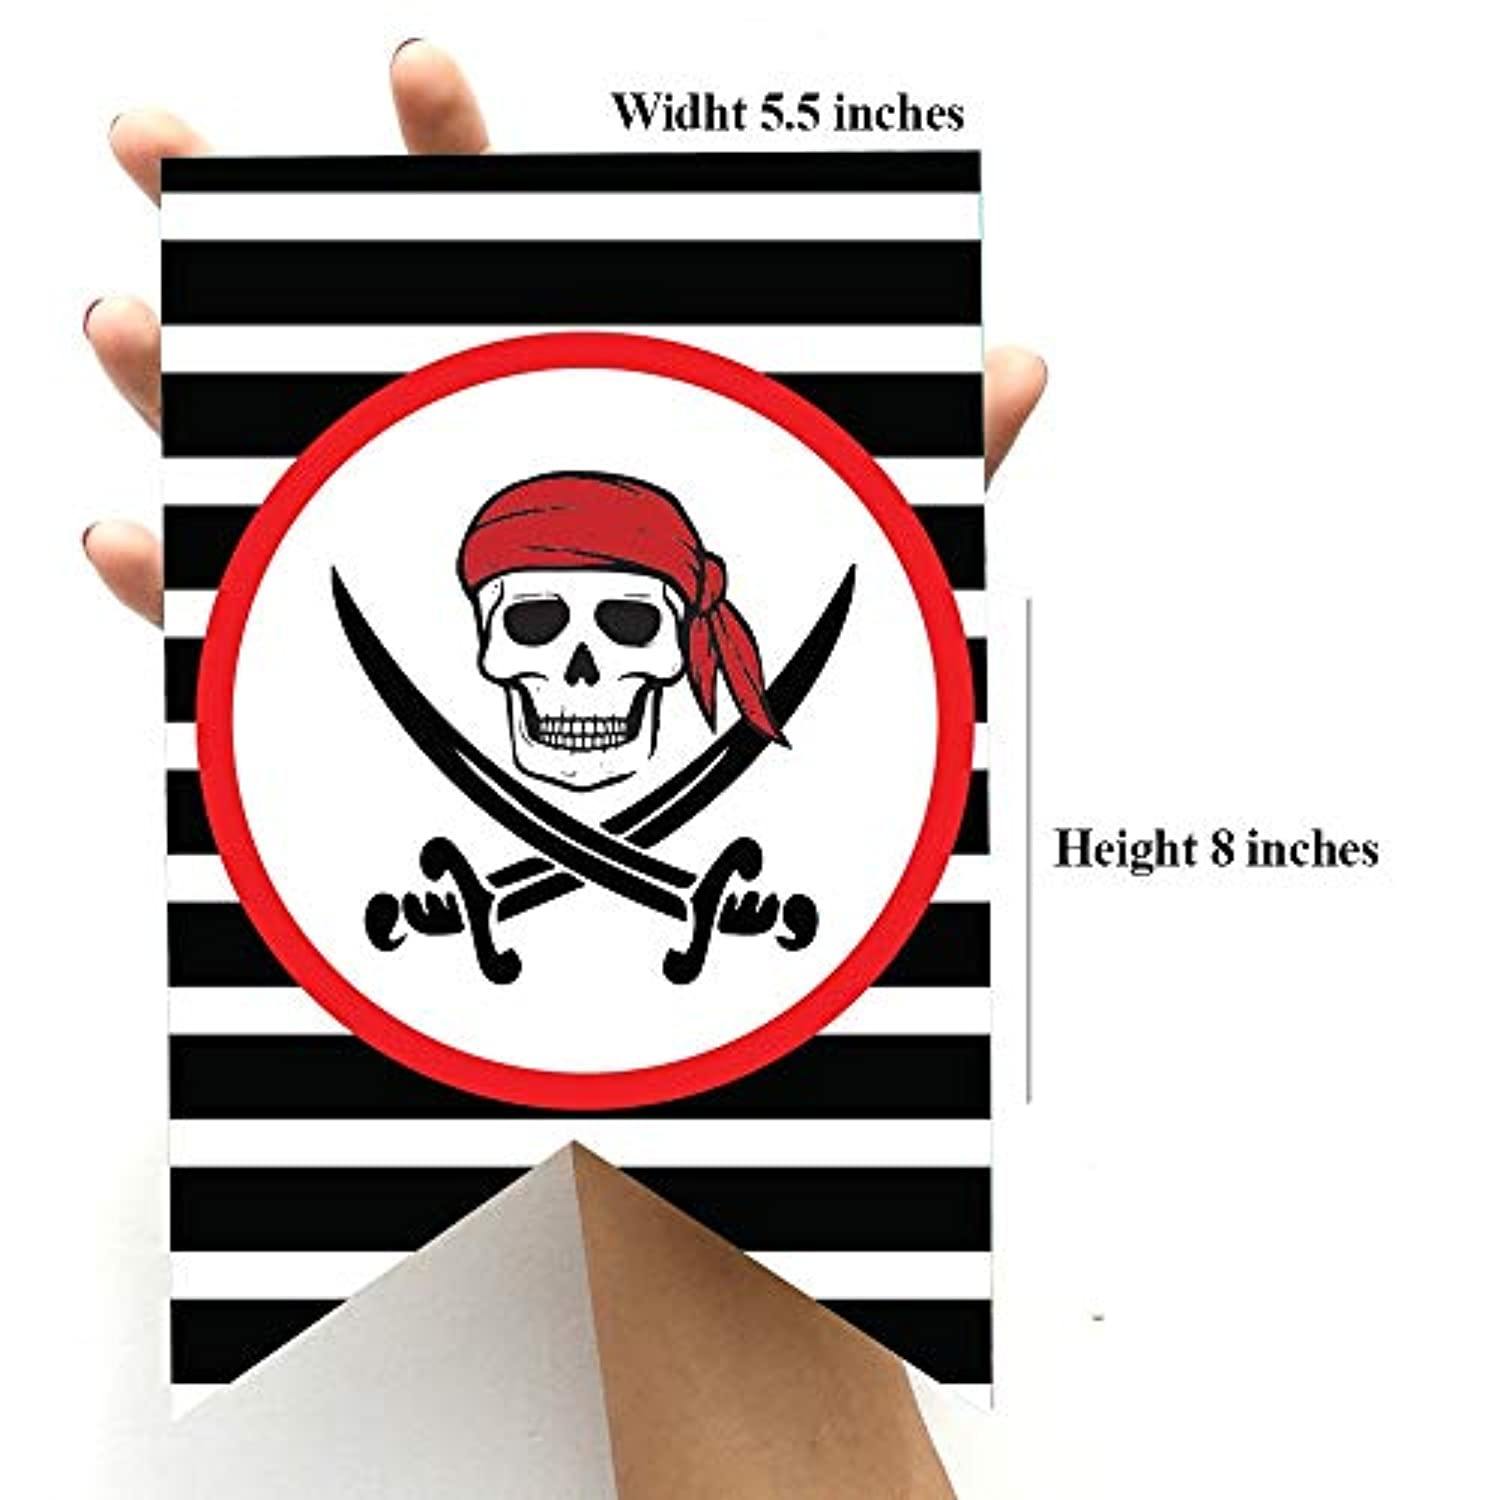 PIRATE THEMED HAPPY BIRTHDAY BANNER - Pirate party supplies - pirate  decorations - pirate birthday party supplies - pirate party - pirate pinata  